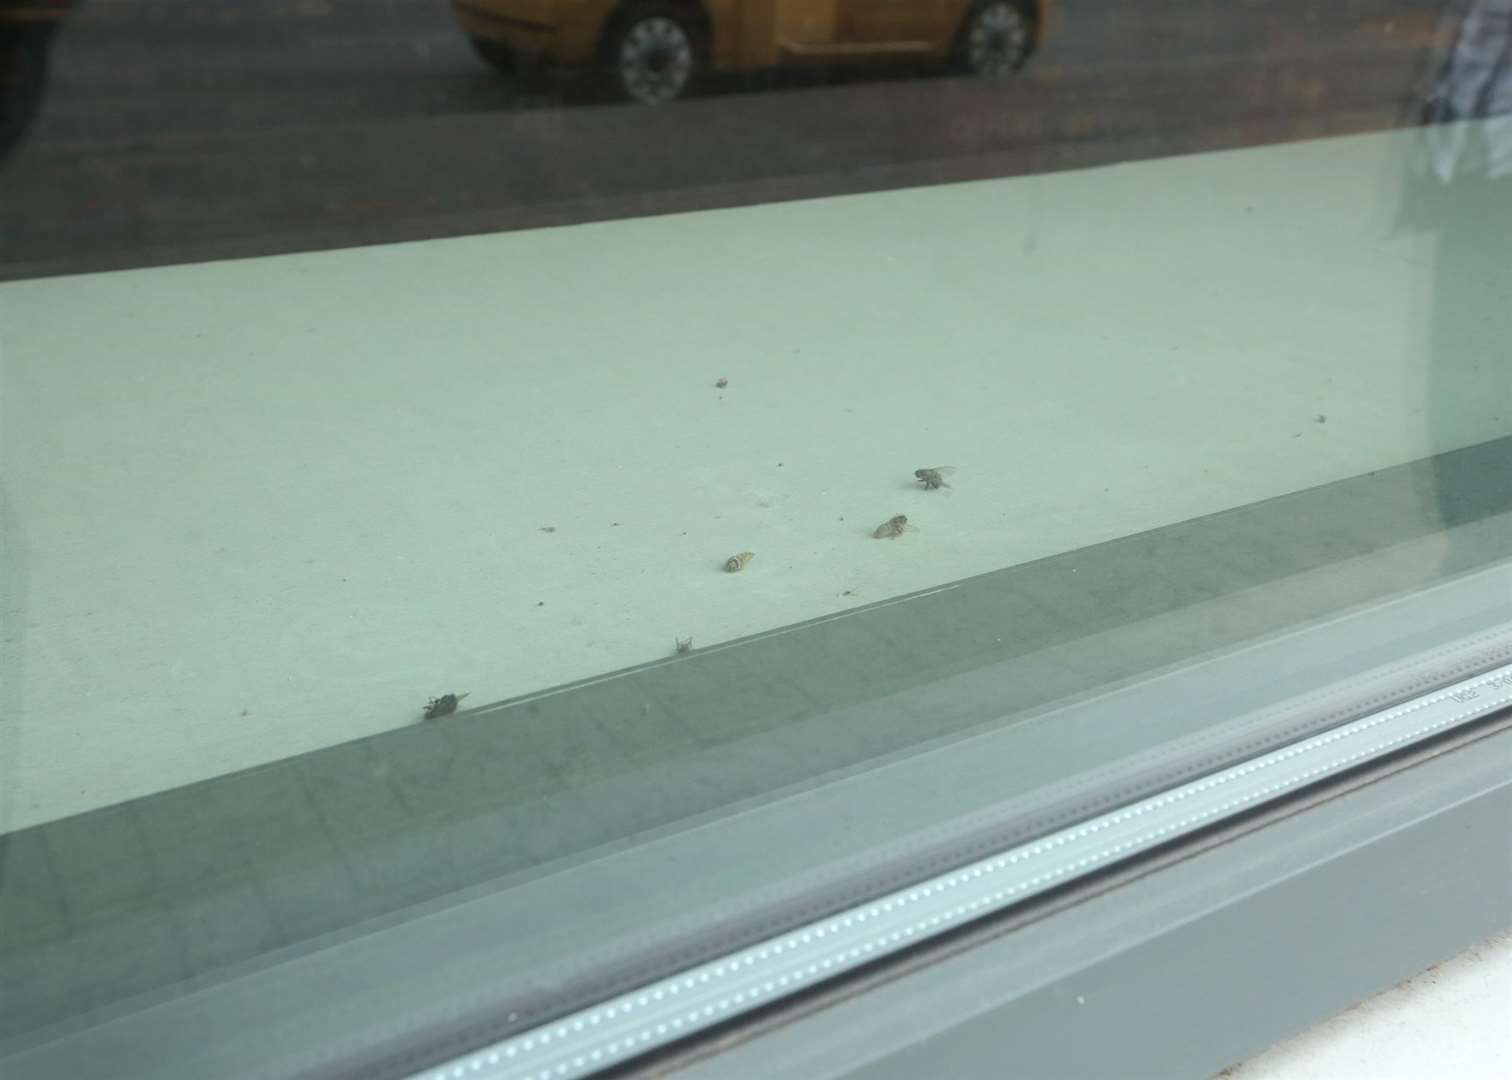 The dead flies and dust were spotted in the window